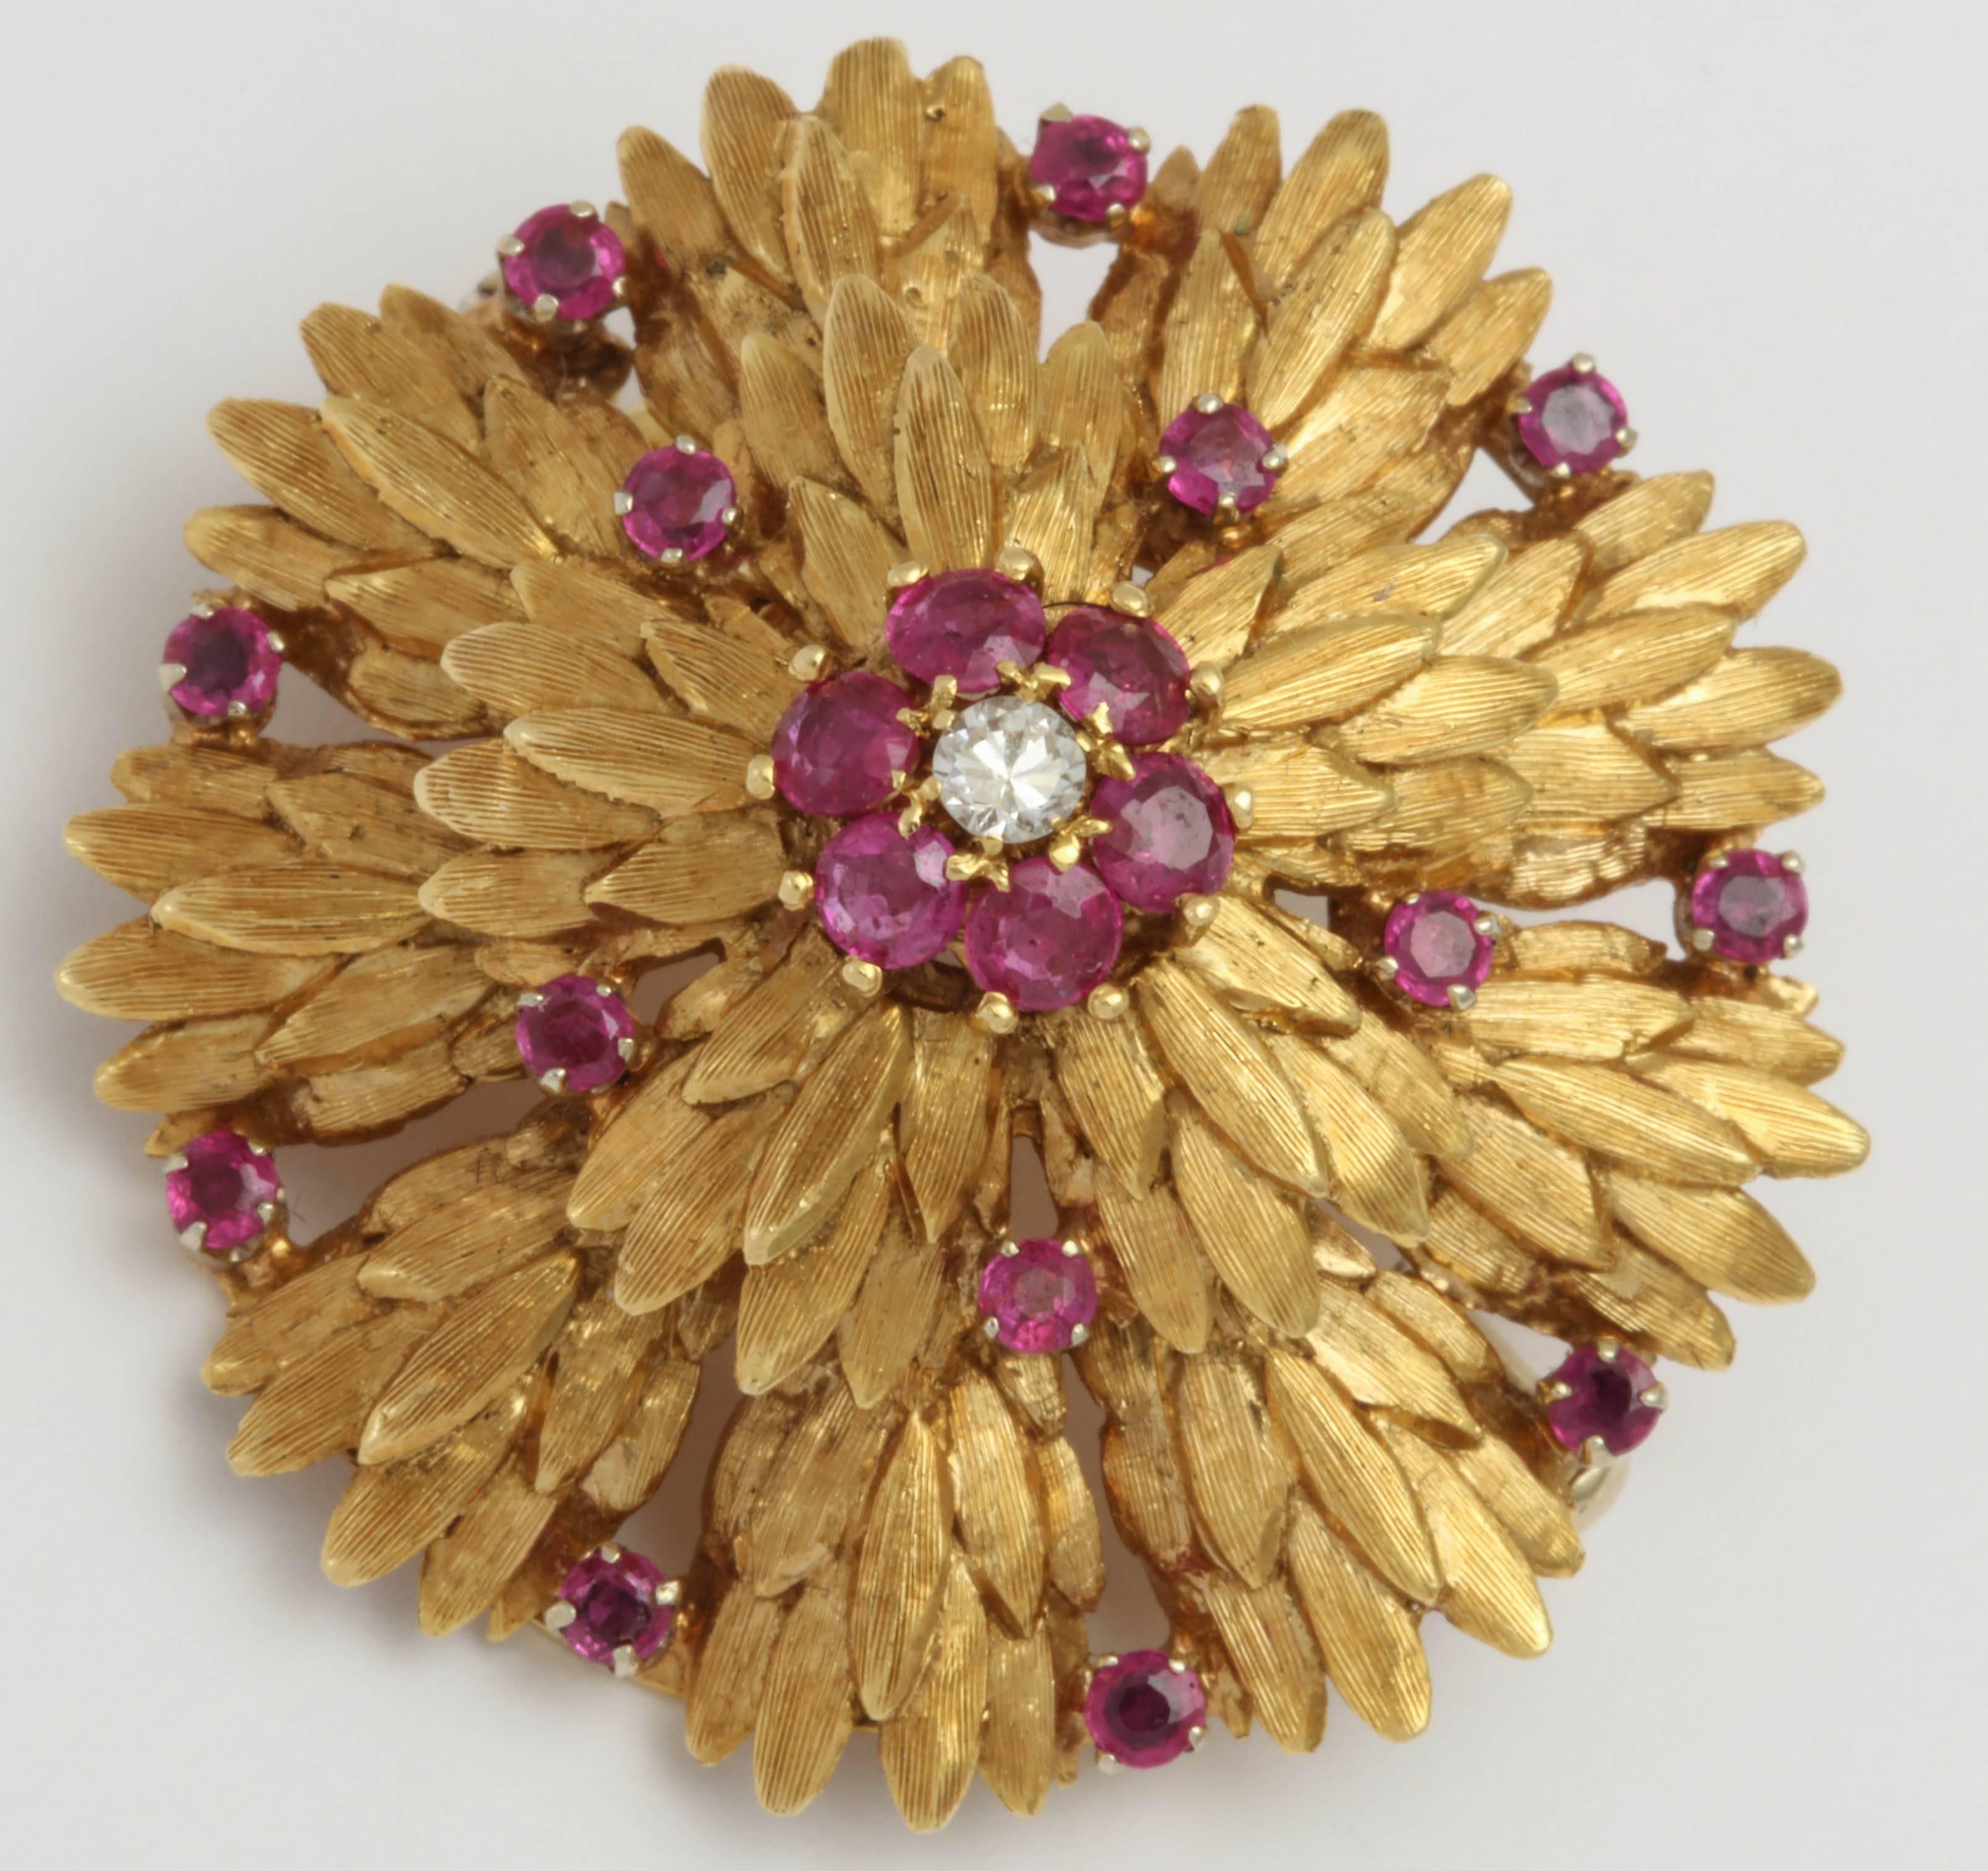 Circular three Dimensional chased 18kt Yellow  Gold Pin set with vivid faceted Rubies and centered with a full cut Diamond surrounded by 6 Rubies. Marked 18kt Italy.  Very chic and very elegant hearkening an age of Suits , White Gloves and a Pillbox